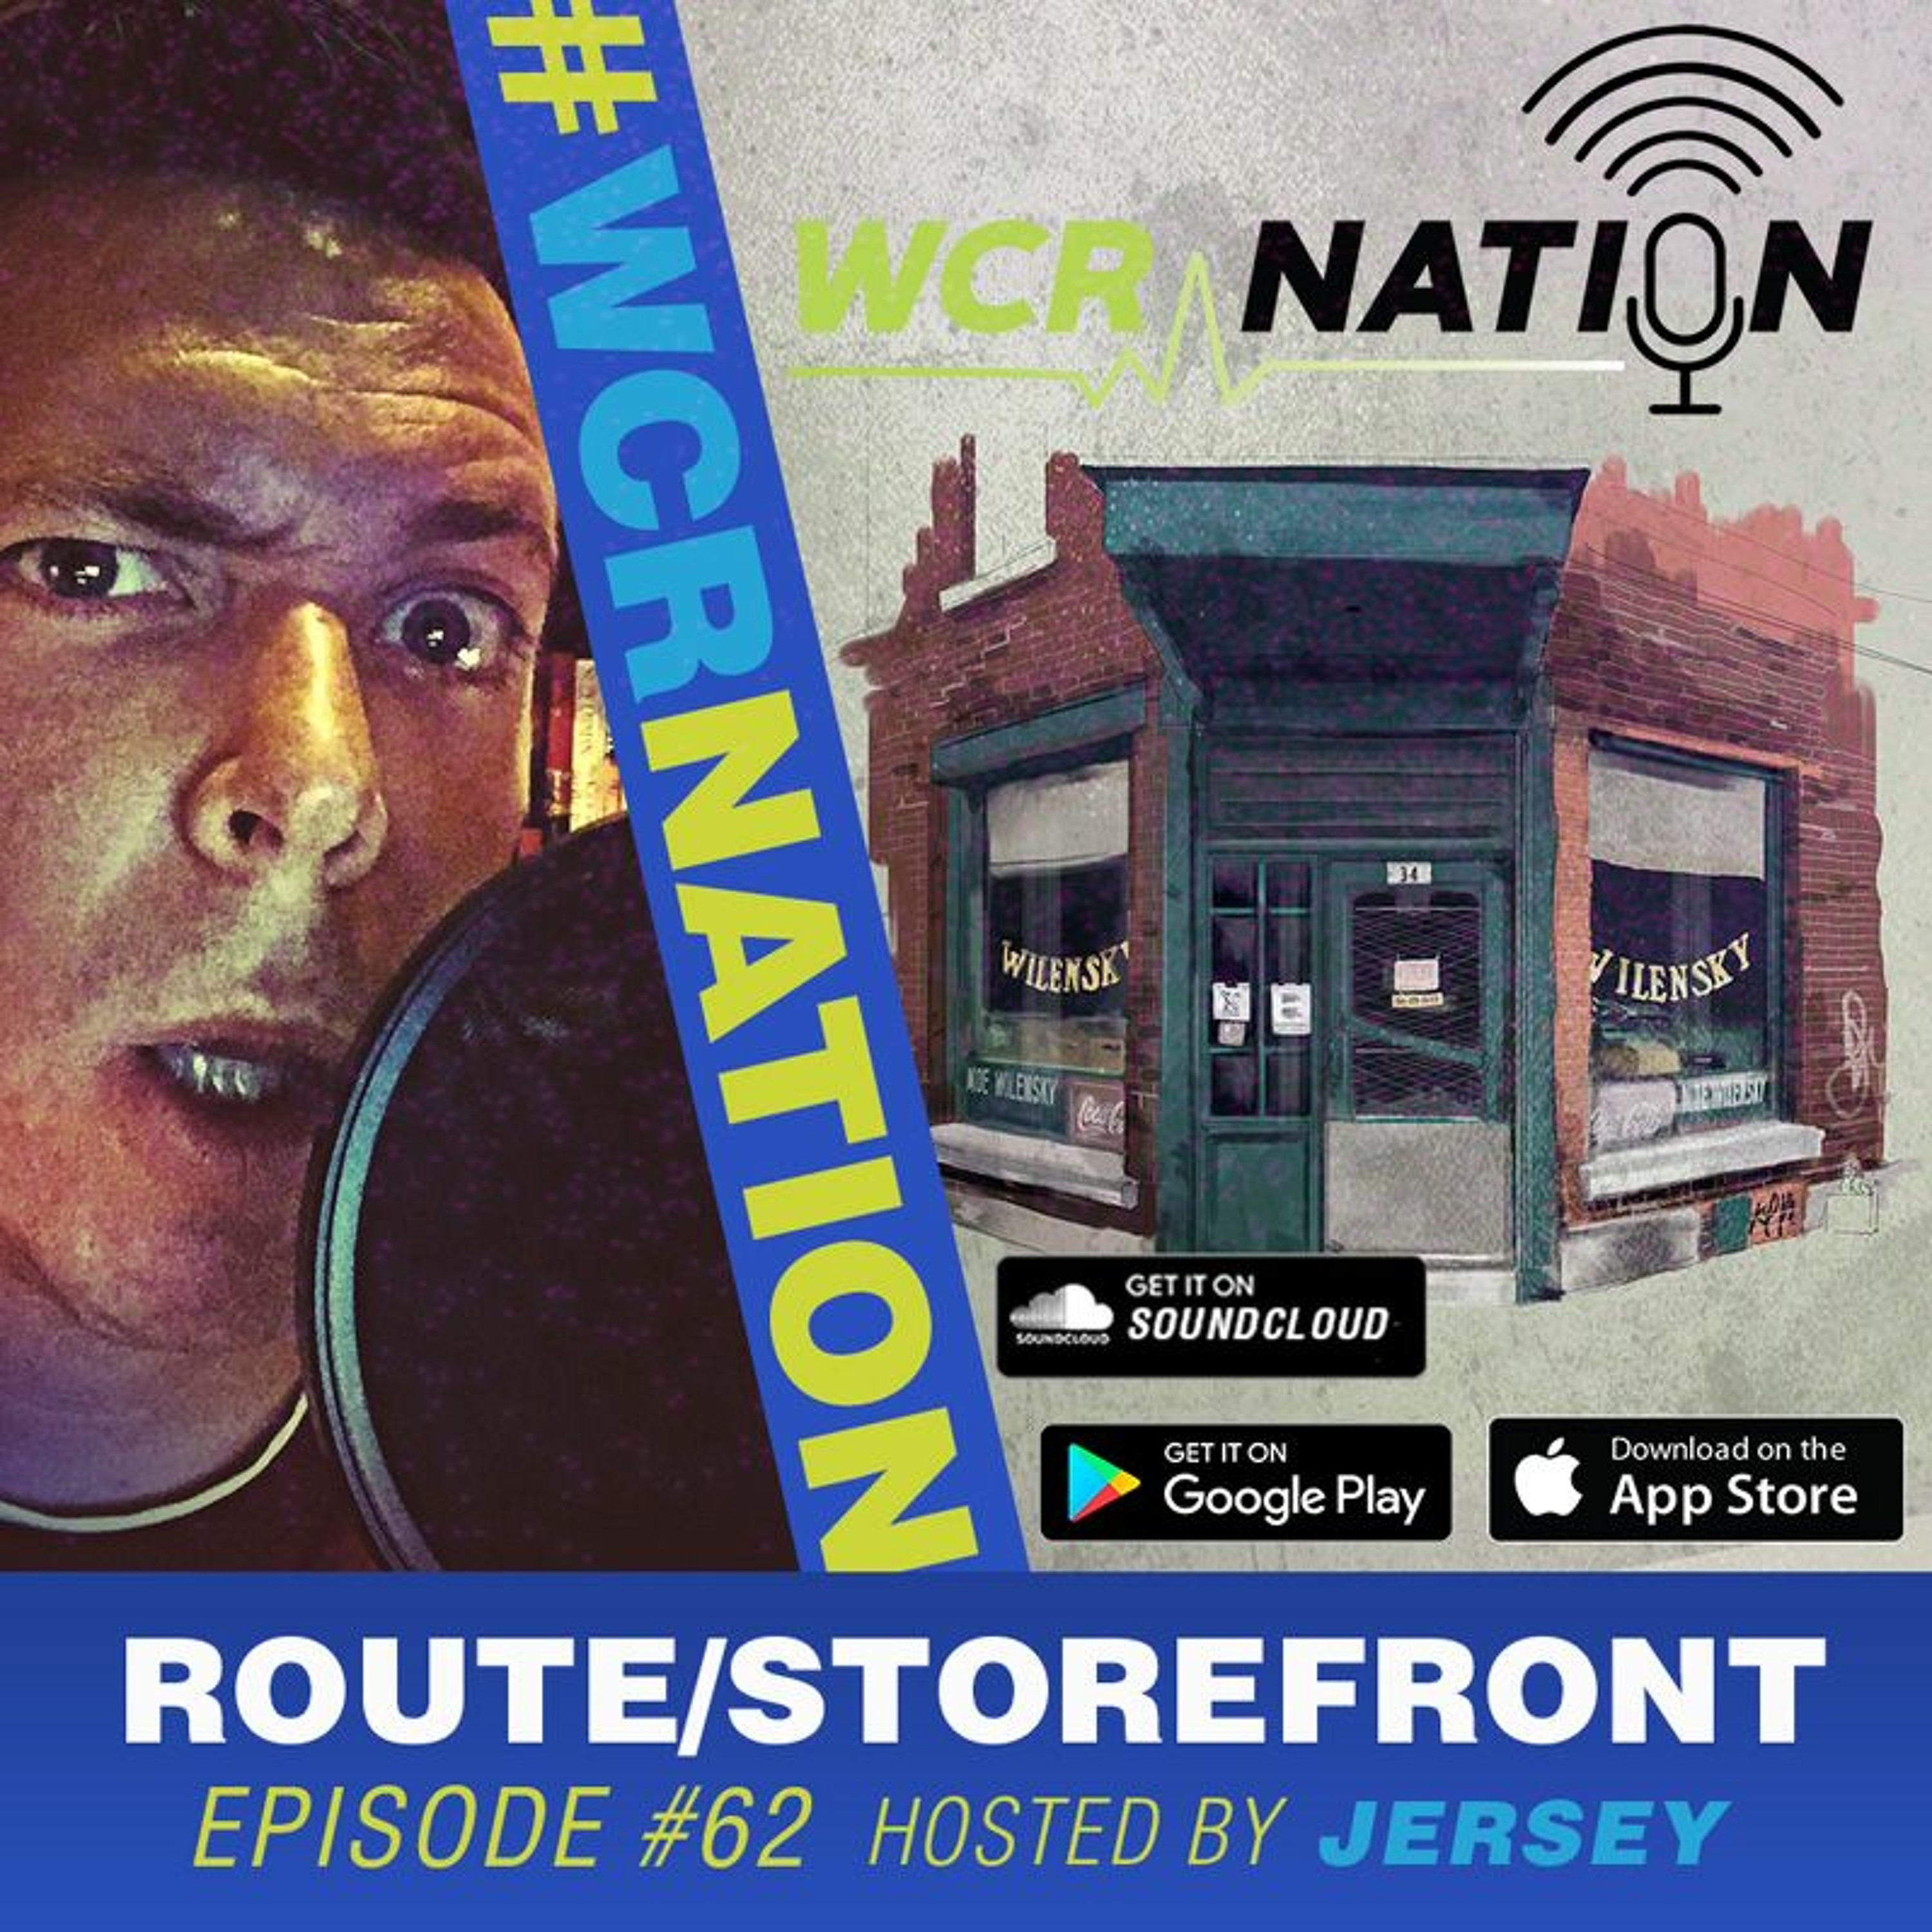 WCR Nation EP 62 Route/Storefront | The Window Cleaning Podcast